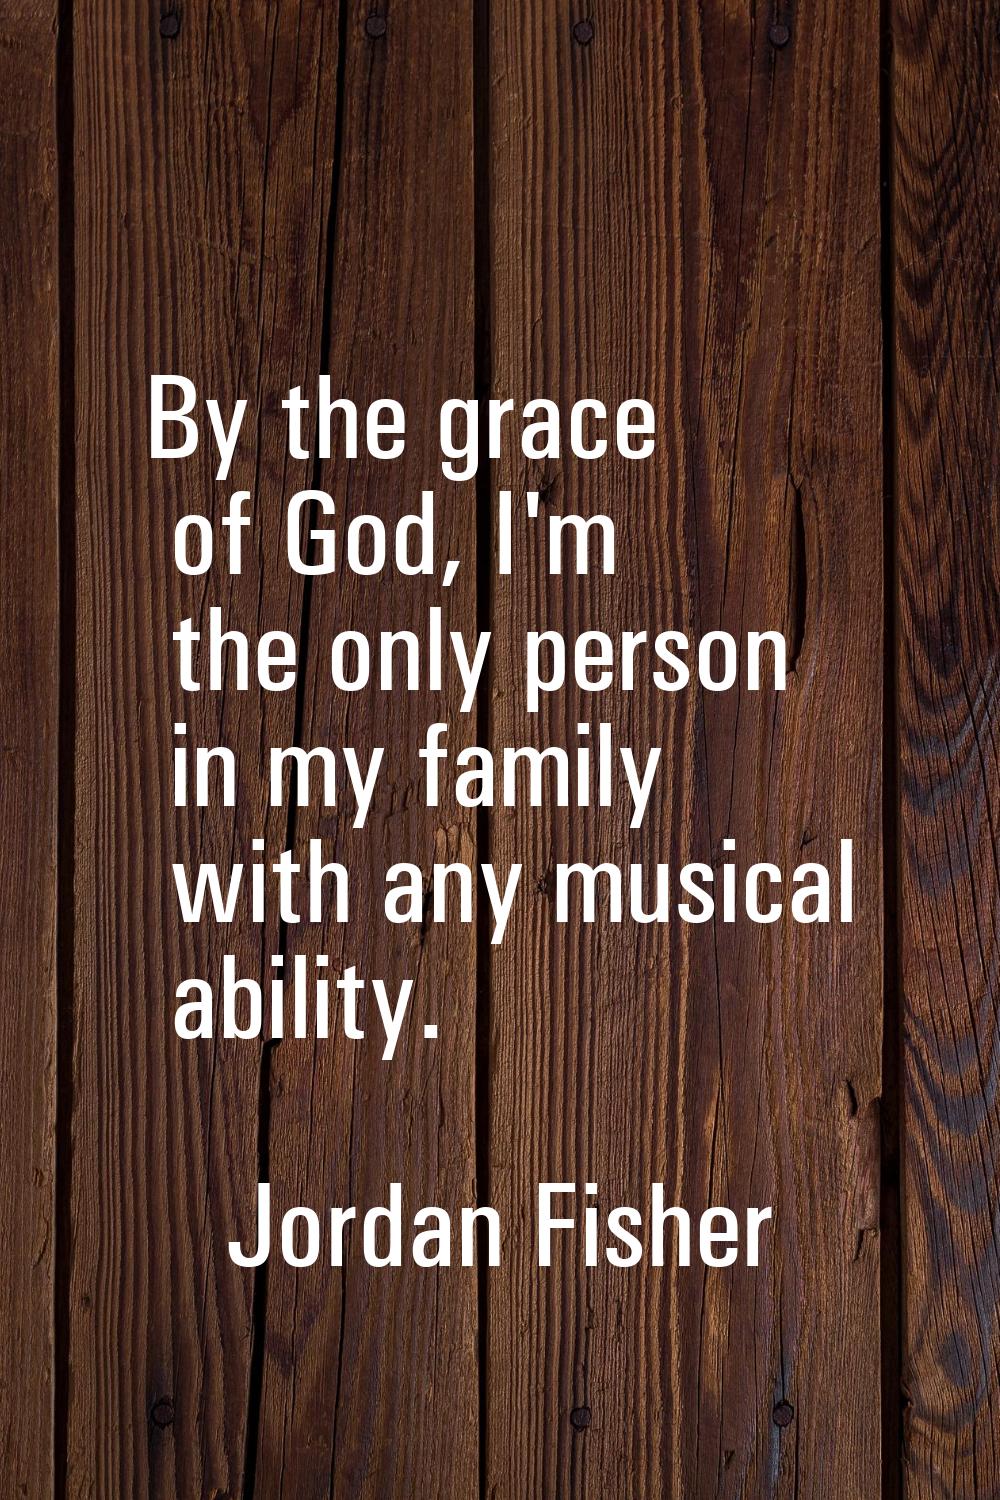 By the grace of God, I'm the only person in my family with any musical ability.